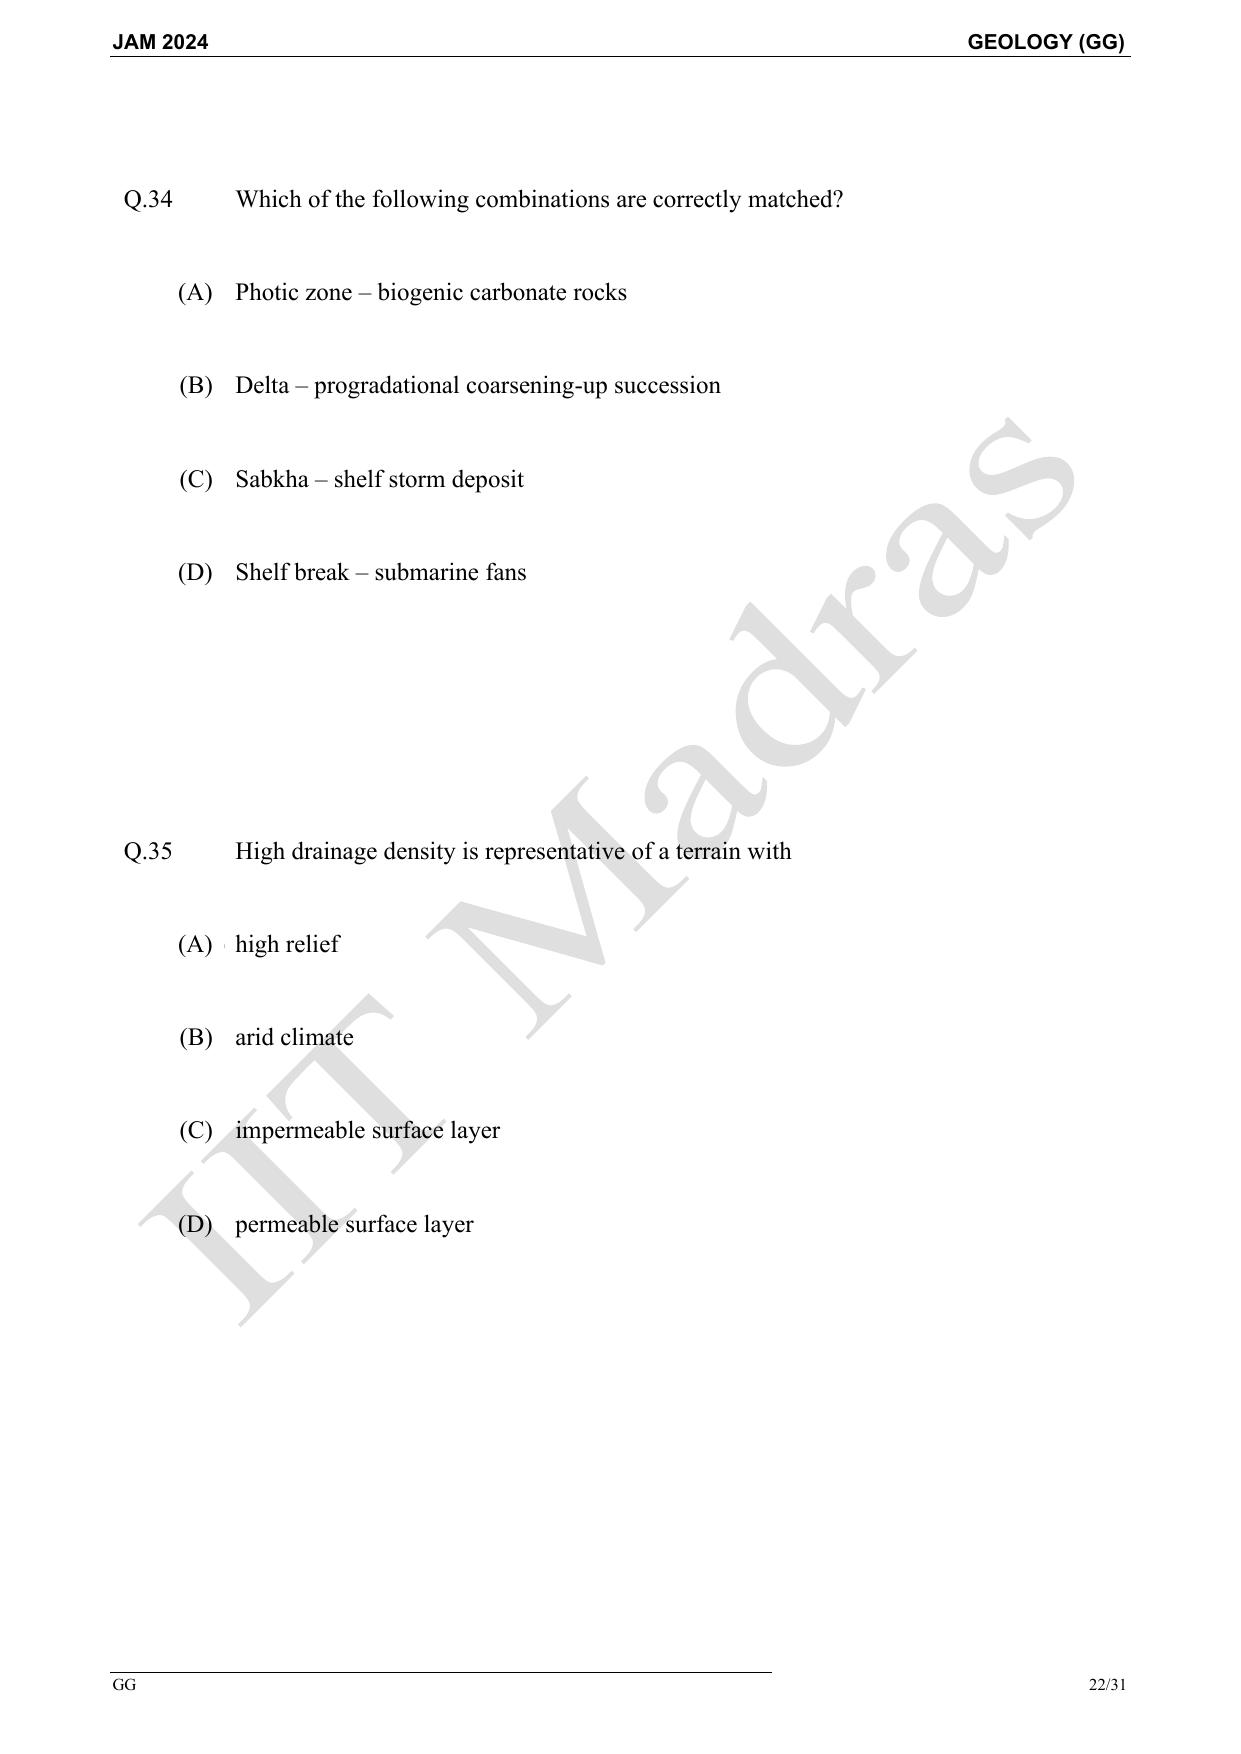 IIT JAM 2024 Geology (GG) Master Question Paper - Page 22